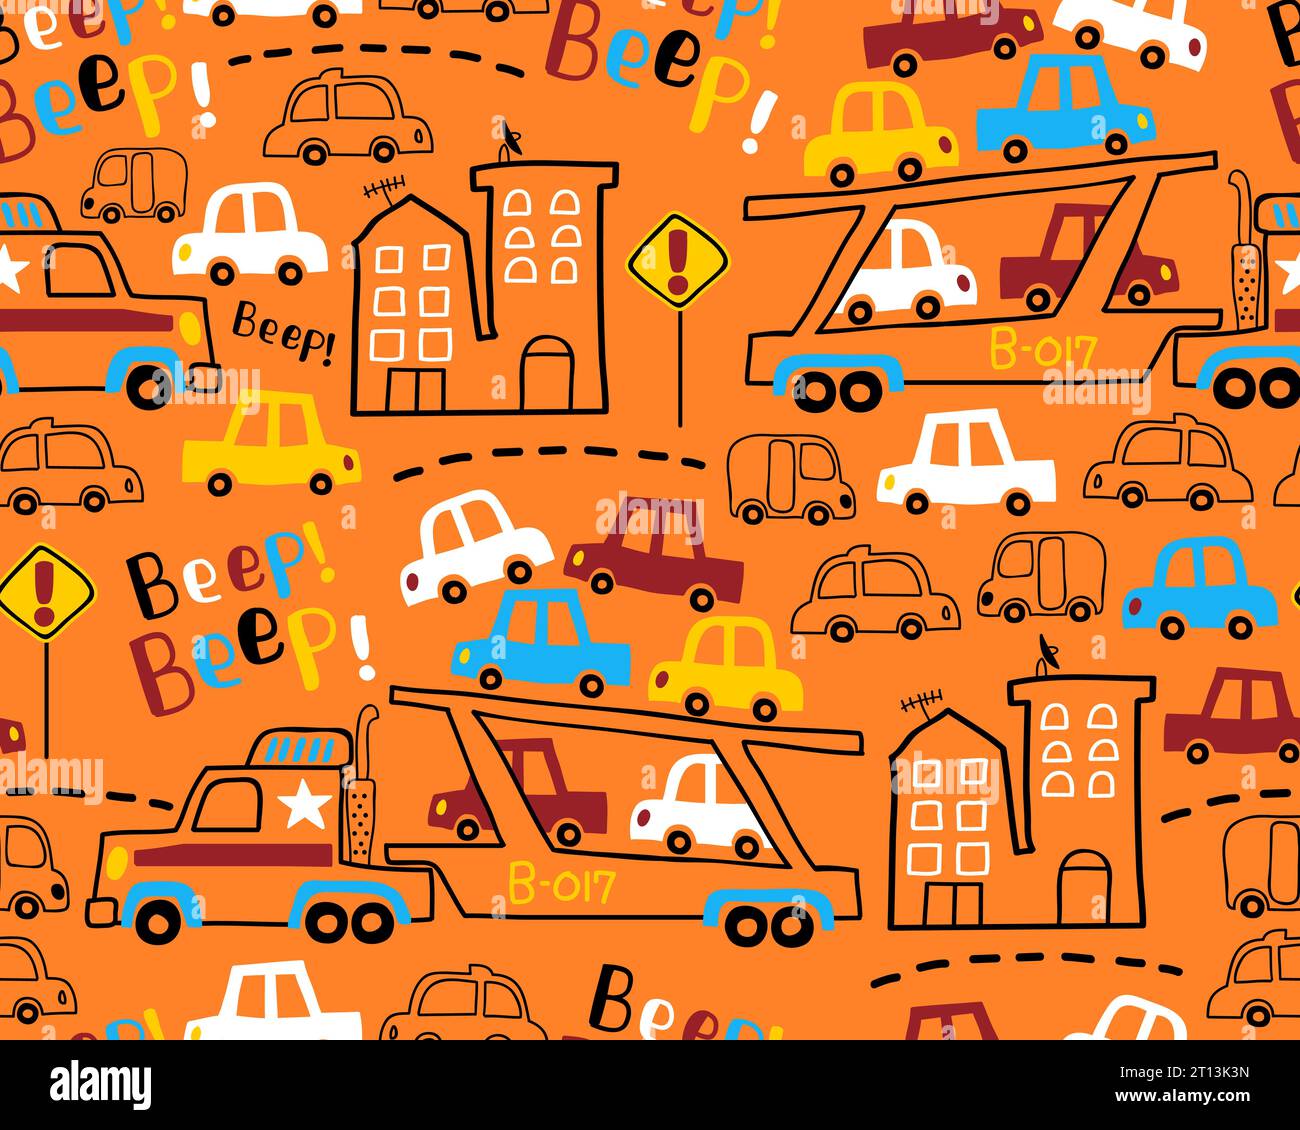 Seamless pattern vector of truck cars carrier cartoon, buildings, traffic signs Stock Vector